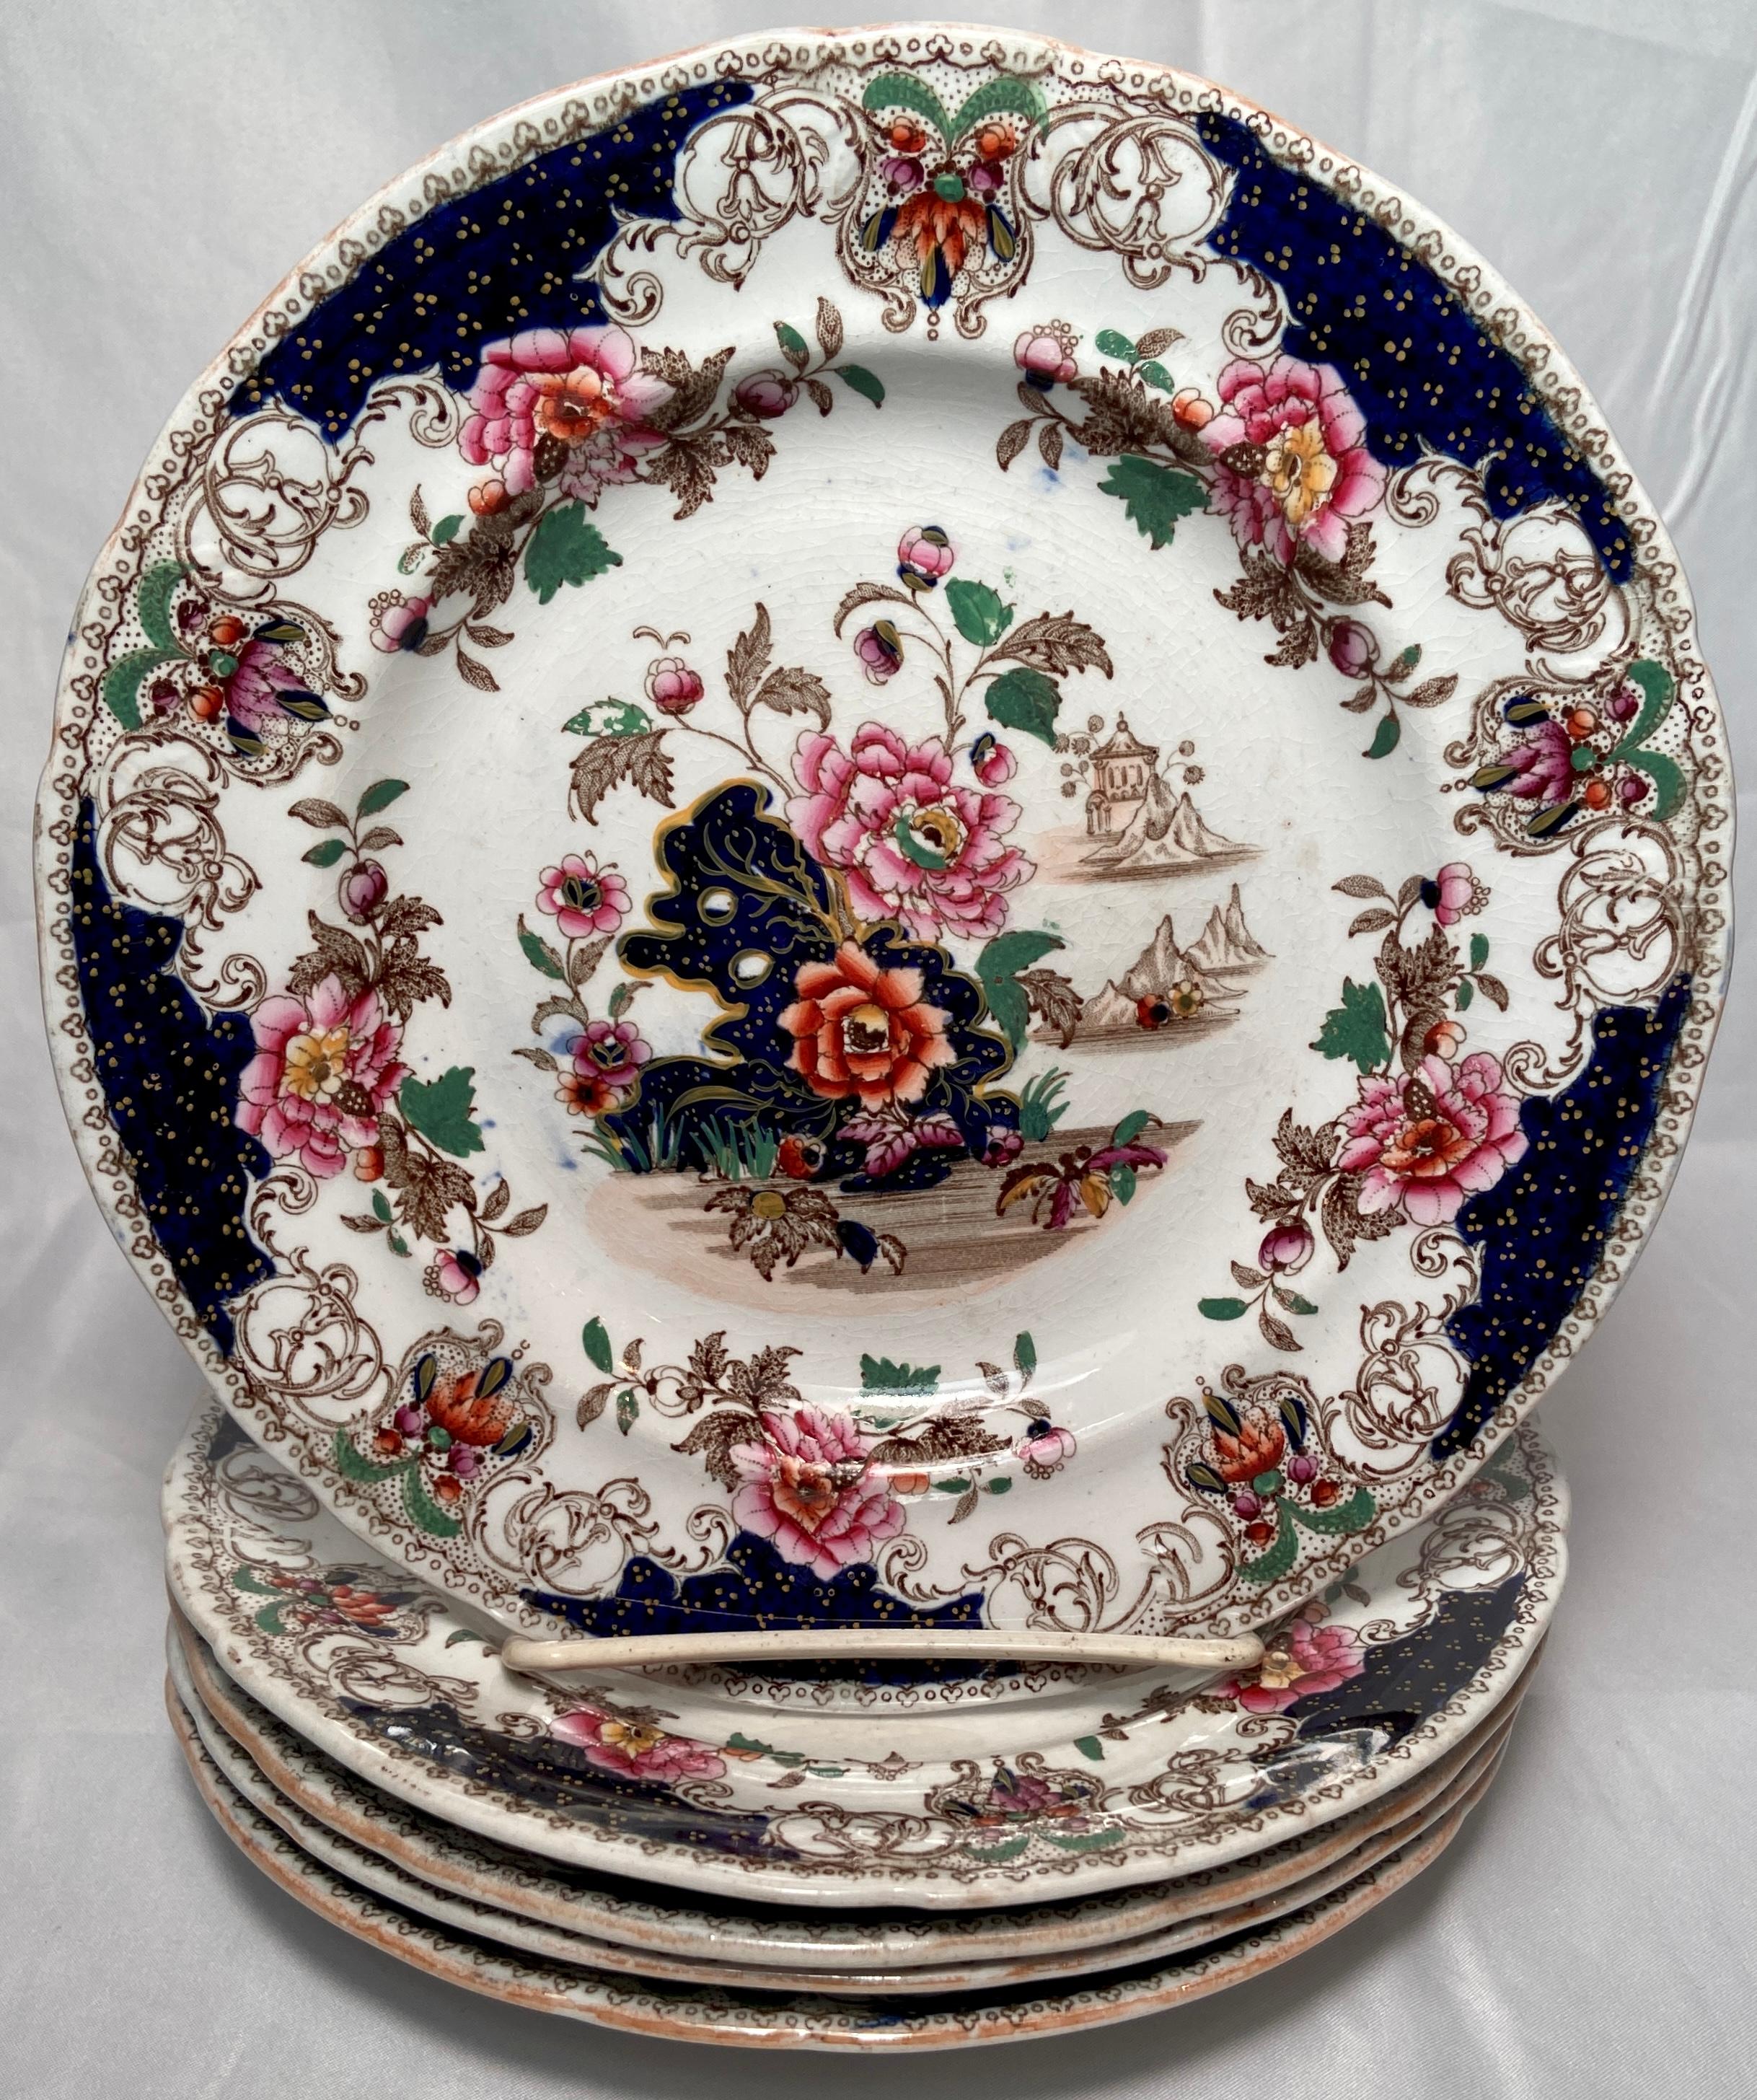 Antique English Dresden Pattern Ironstone Dinner Set, Circa 1870-1880 In Good Condition For Sale In New Orleans, LA